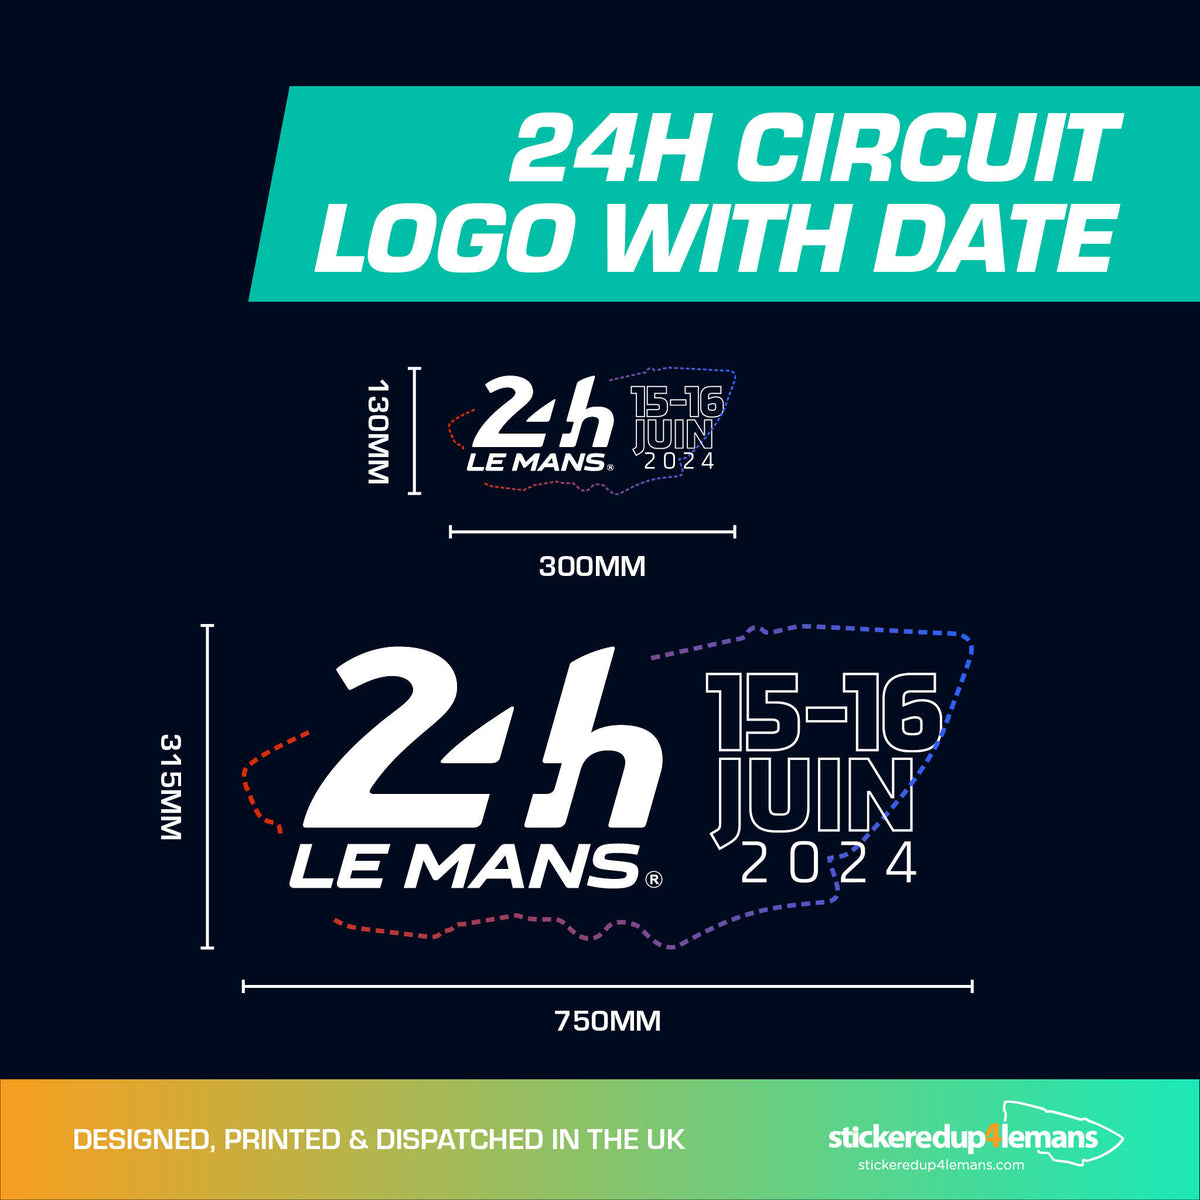 Official 24h Circuit Logo with Date - 2024